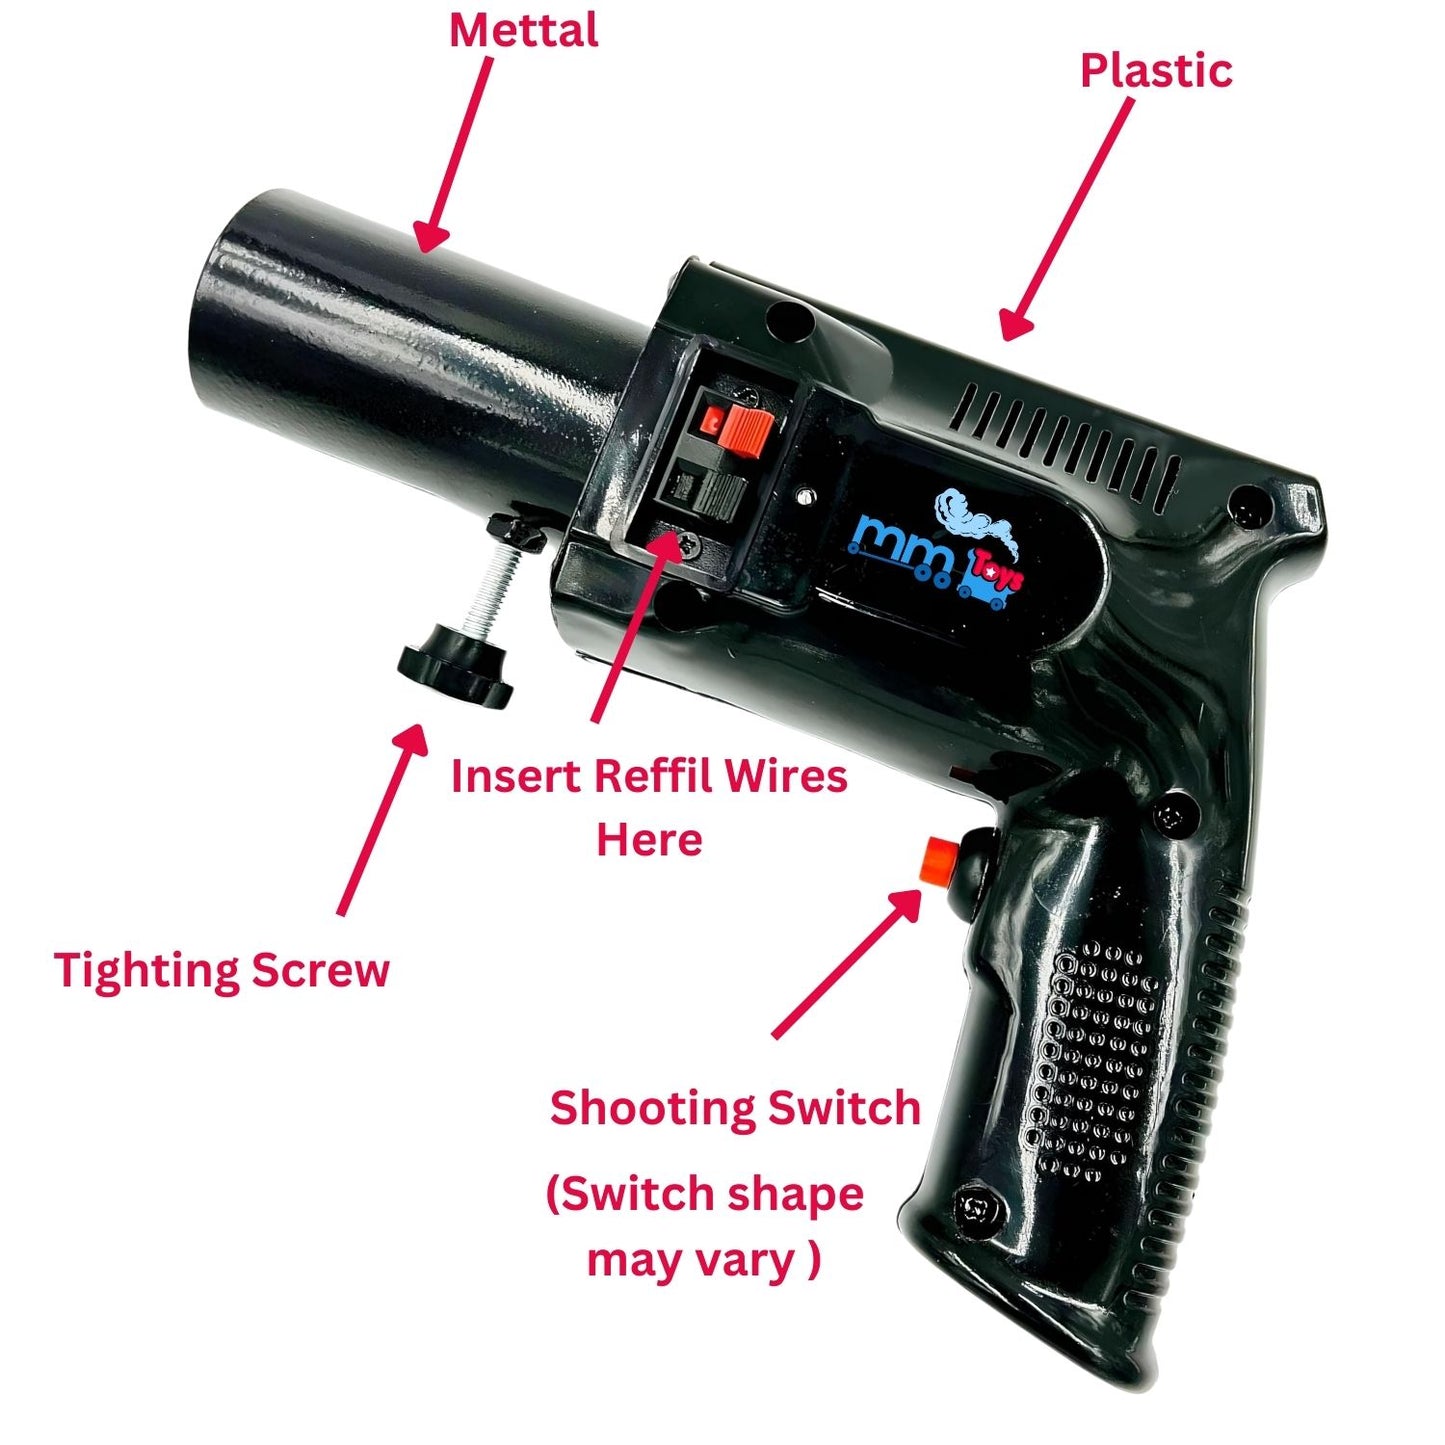 MM TOYS Handheld Sparkle Smoke Gun Cold Fire Gun - Safe, Easy-to-Use for Parties And Home Use | Durable Mettal Nozzle, Plastic Body | Versatile Cold Pyro | Black